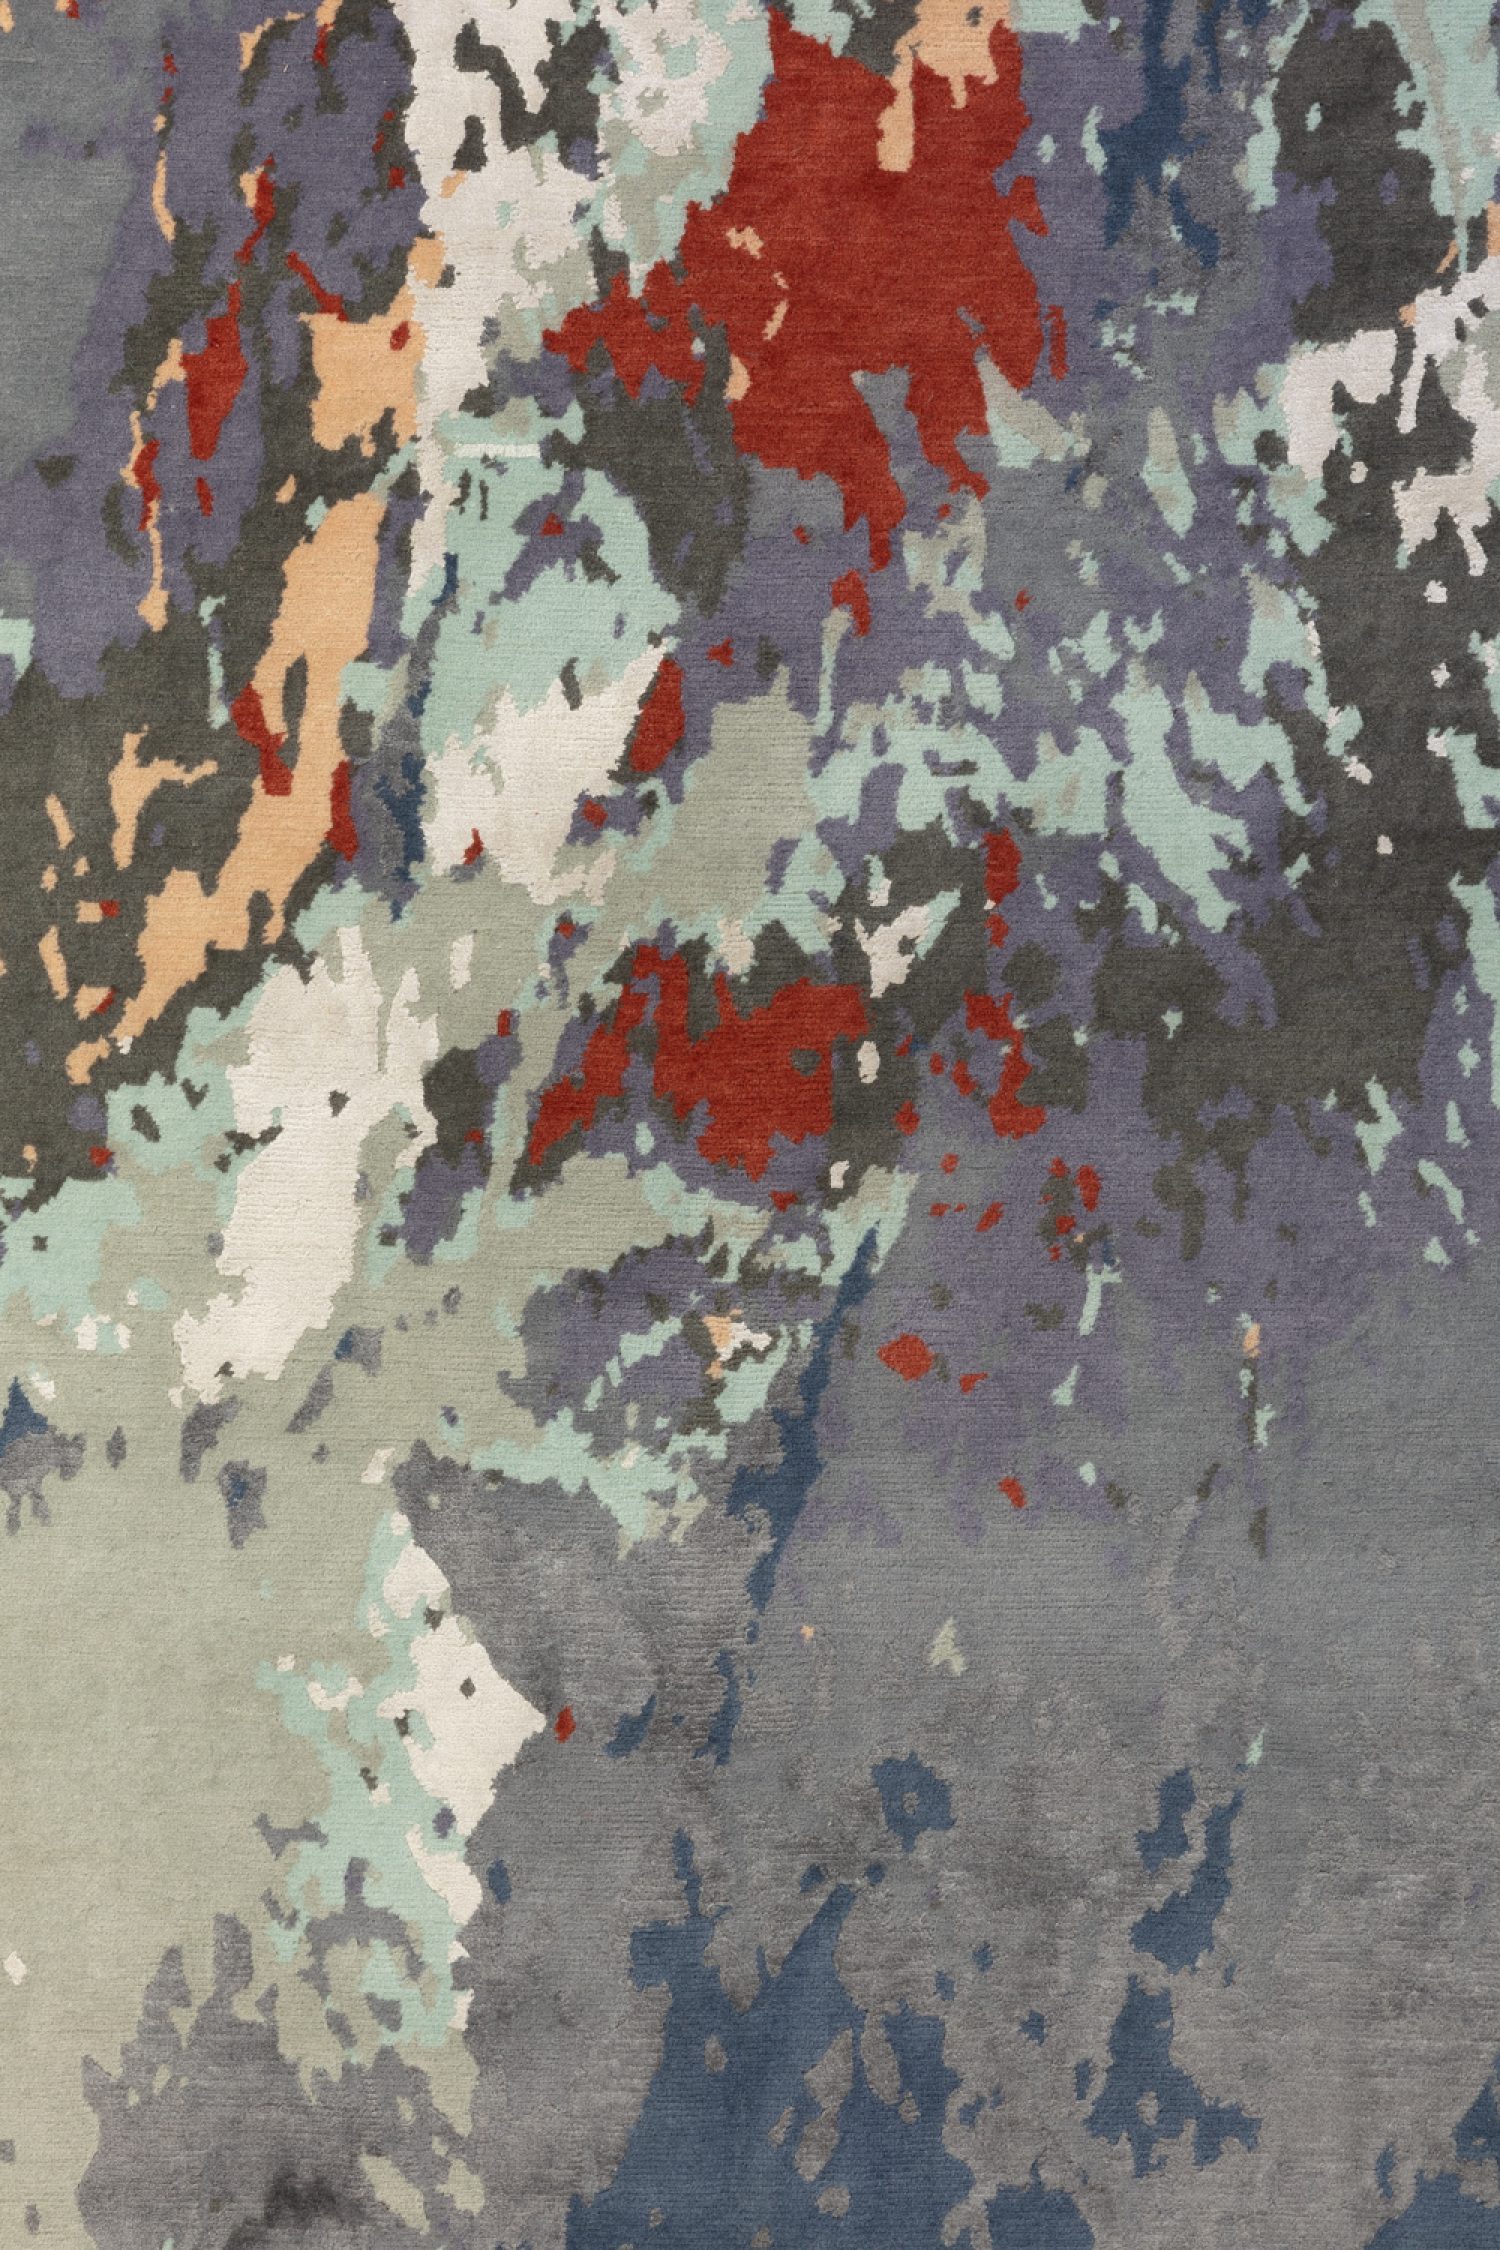 An abstract design with a painterly feel that's wonderfully expressive